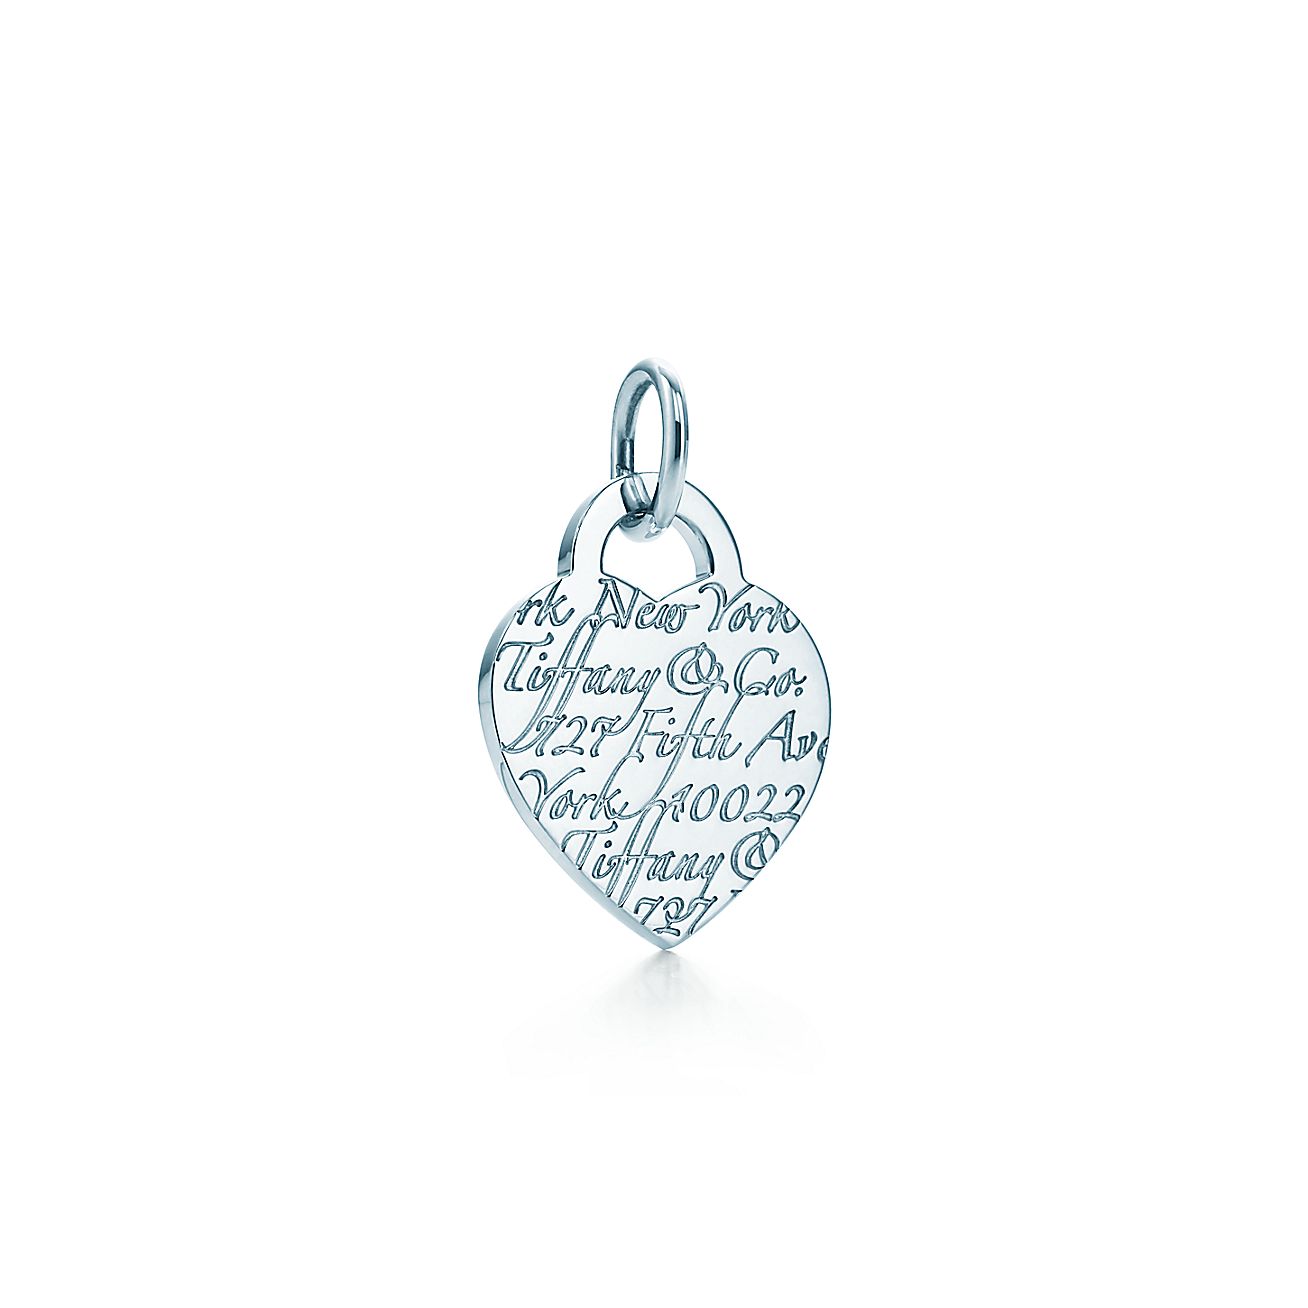 Tiffany Notes heart tag charm in sterling silver. | Tiffany & Co.